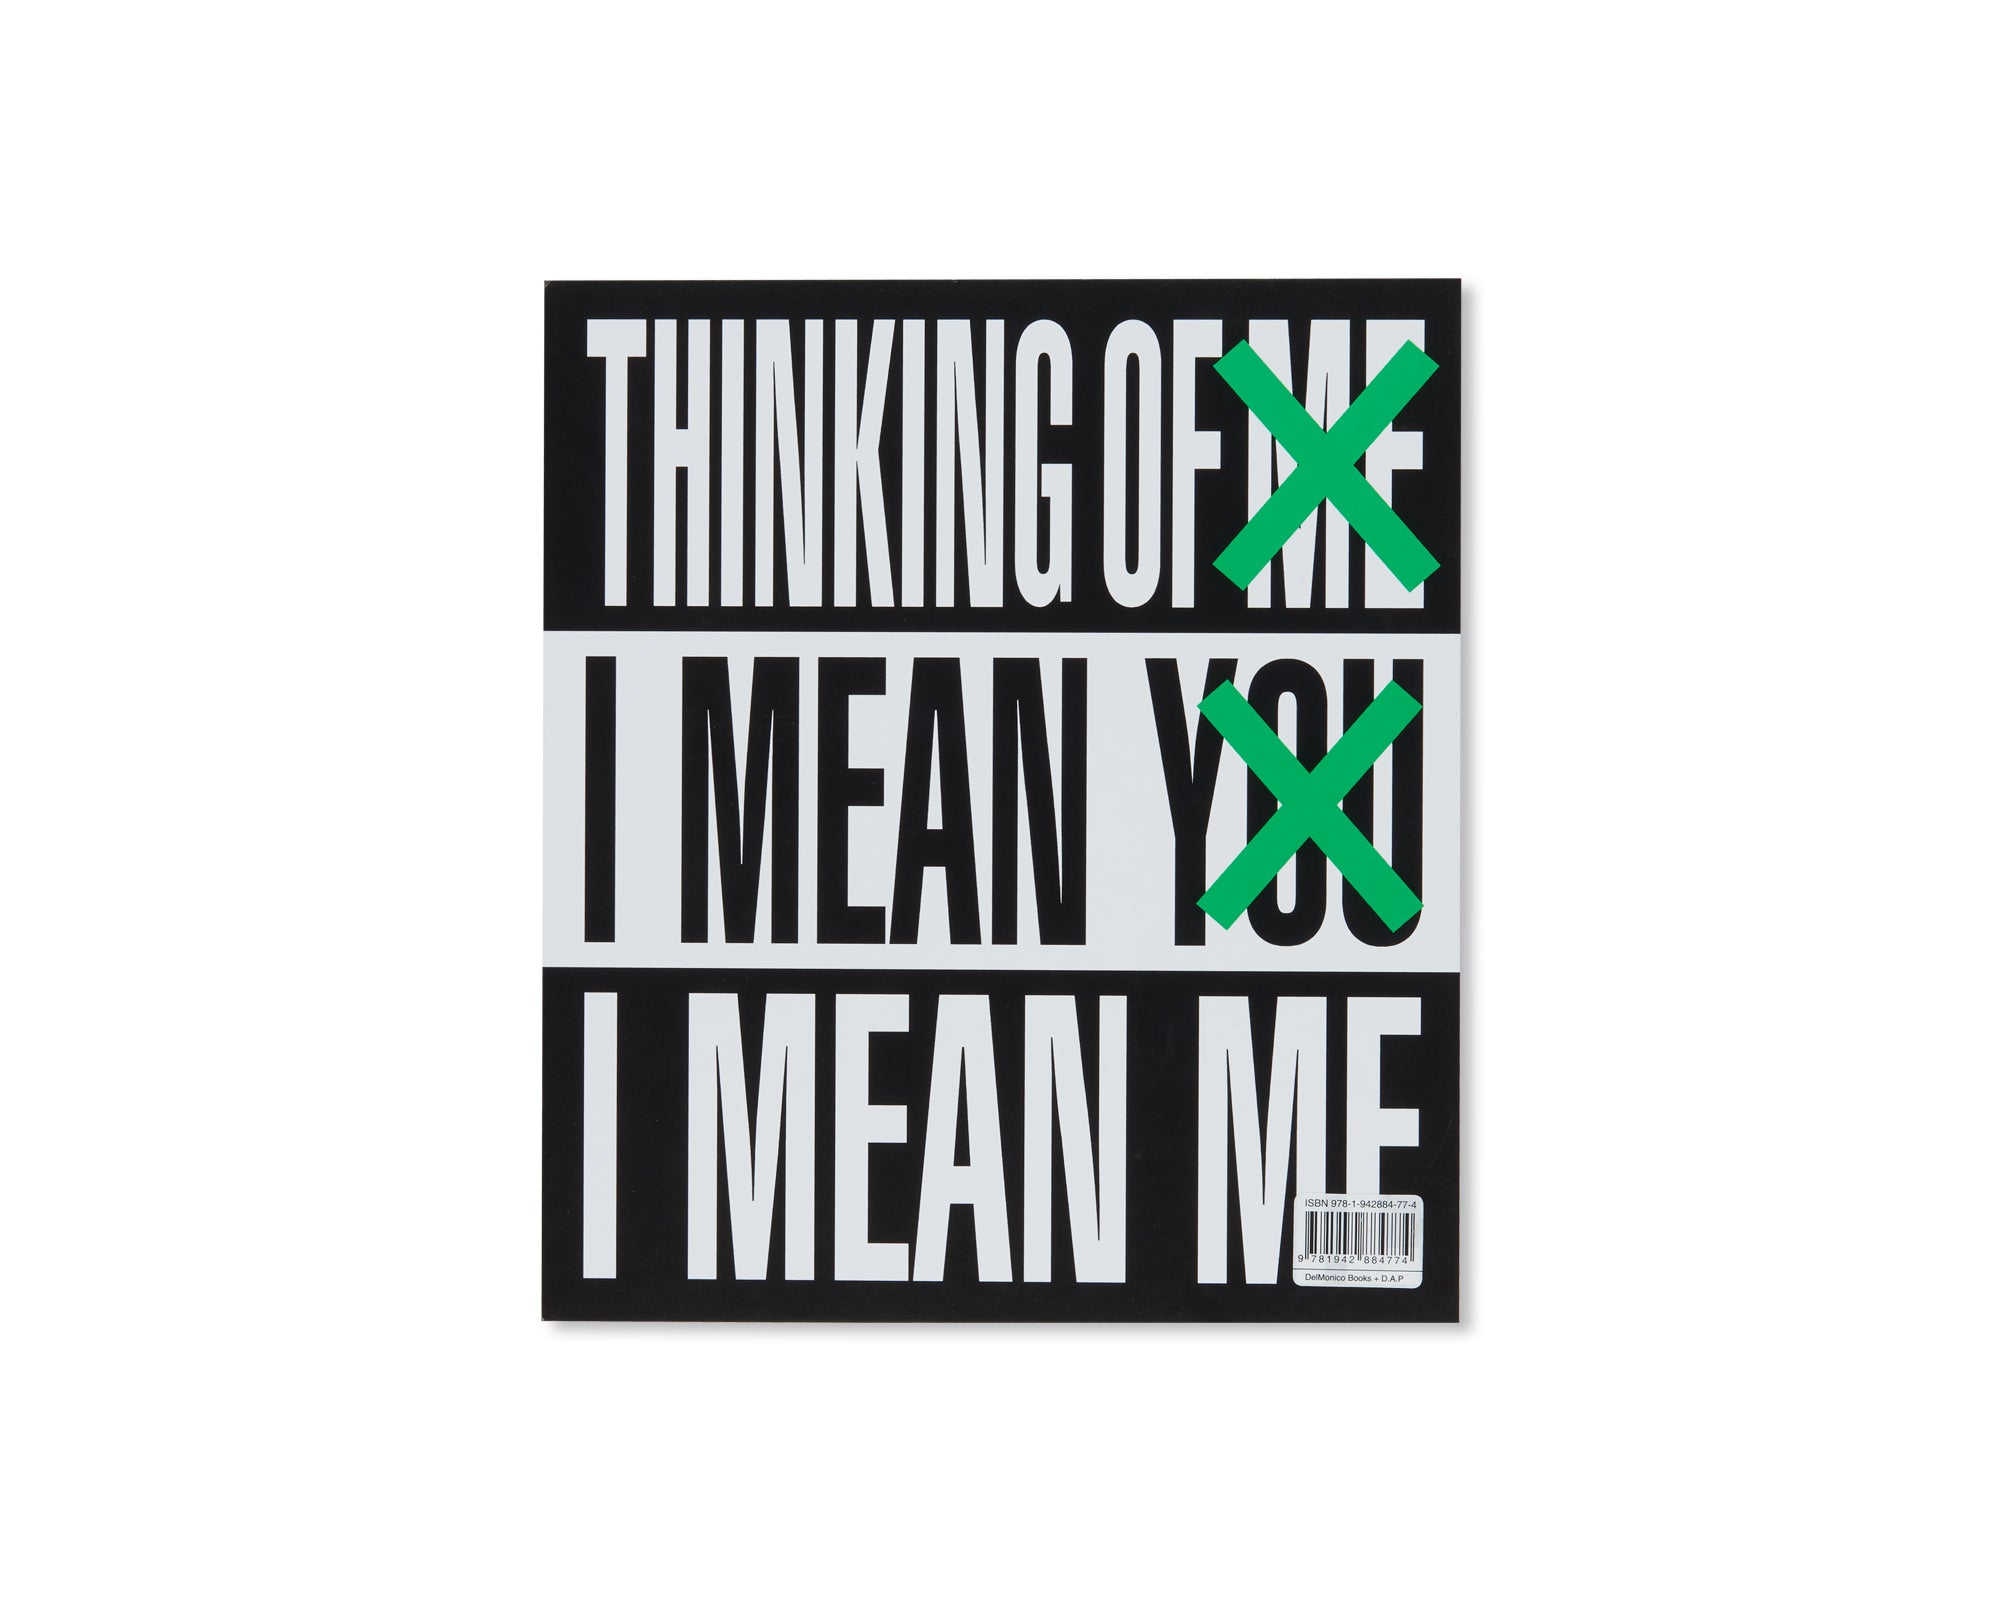 THINKING OF YOU. I MEAN ME. I MEAN YOU. by Barbara Kruger